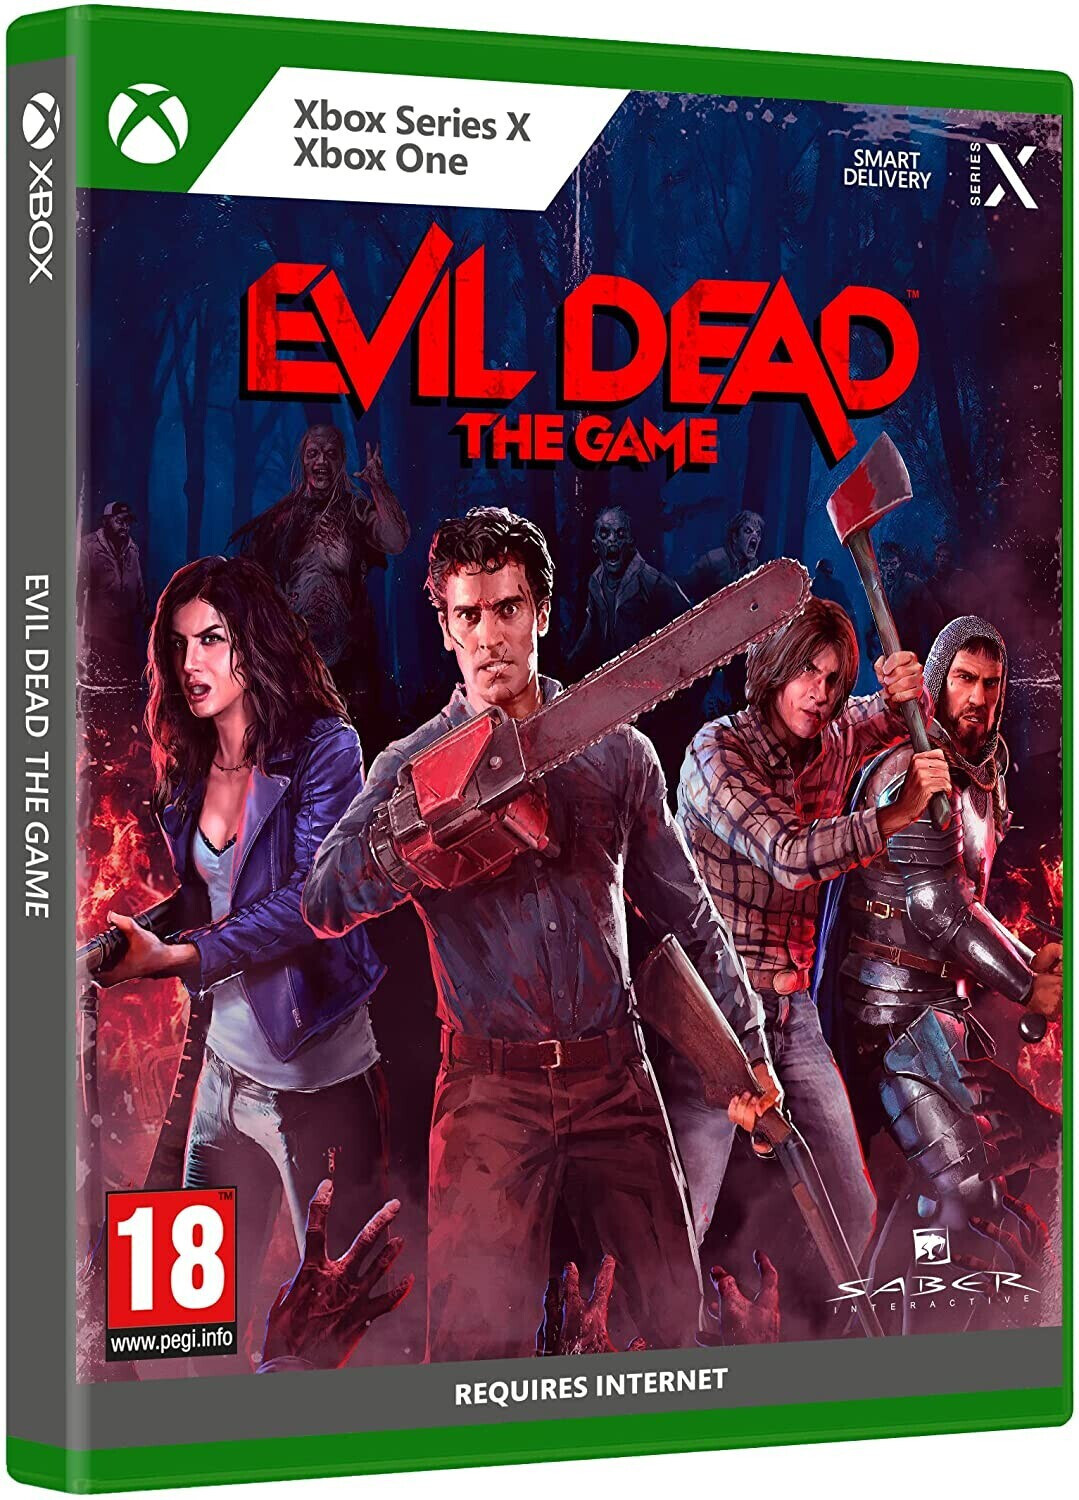 Photos - Game Boss Team  Evil Dead: The Game (Xbox One)